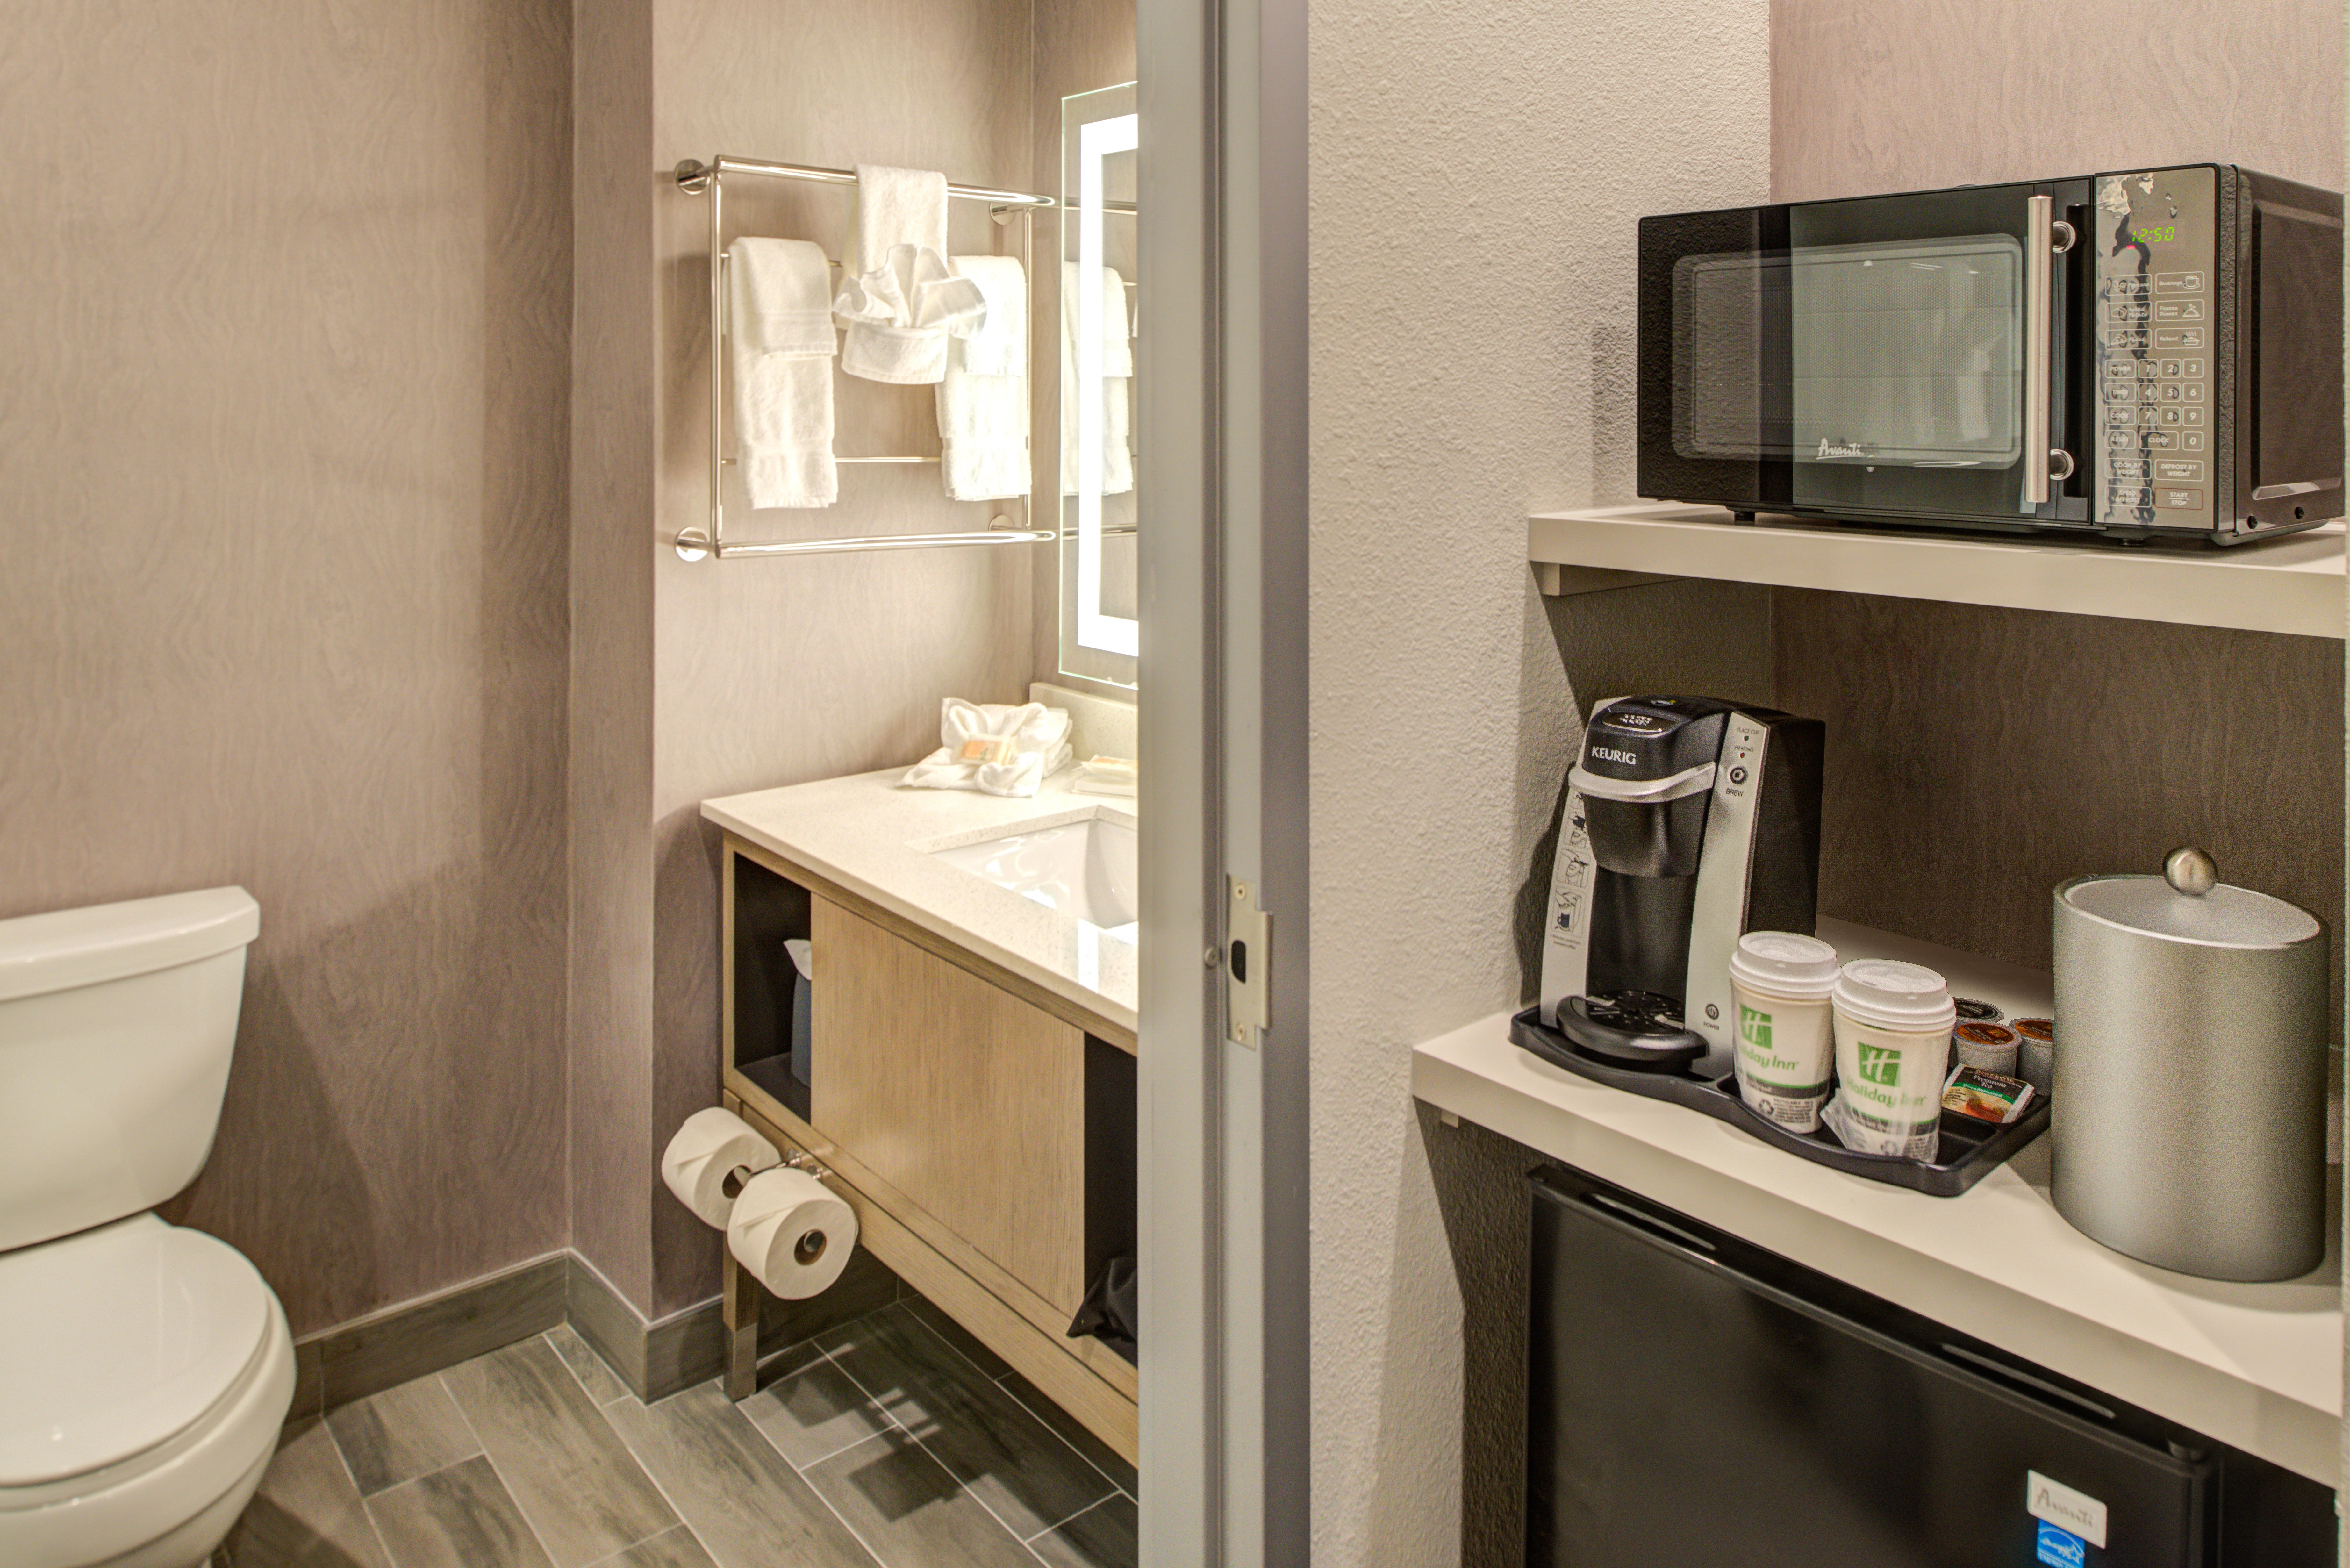  Modern guestroom amenities at our Katy hotel